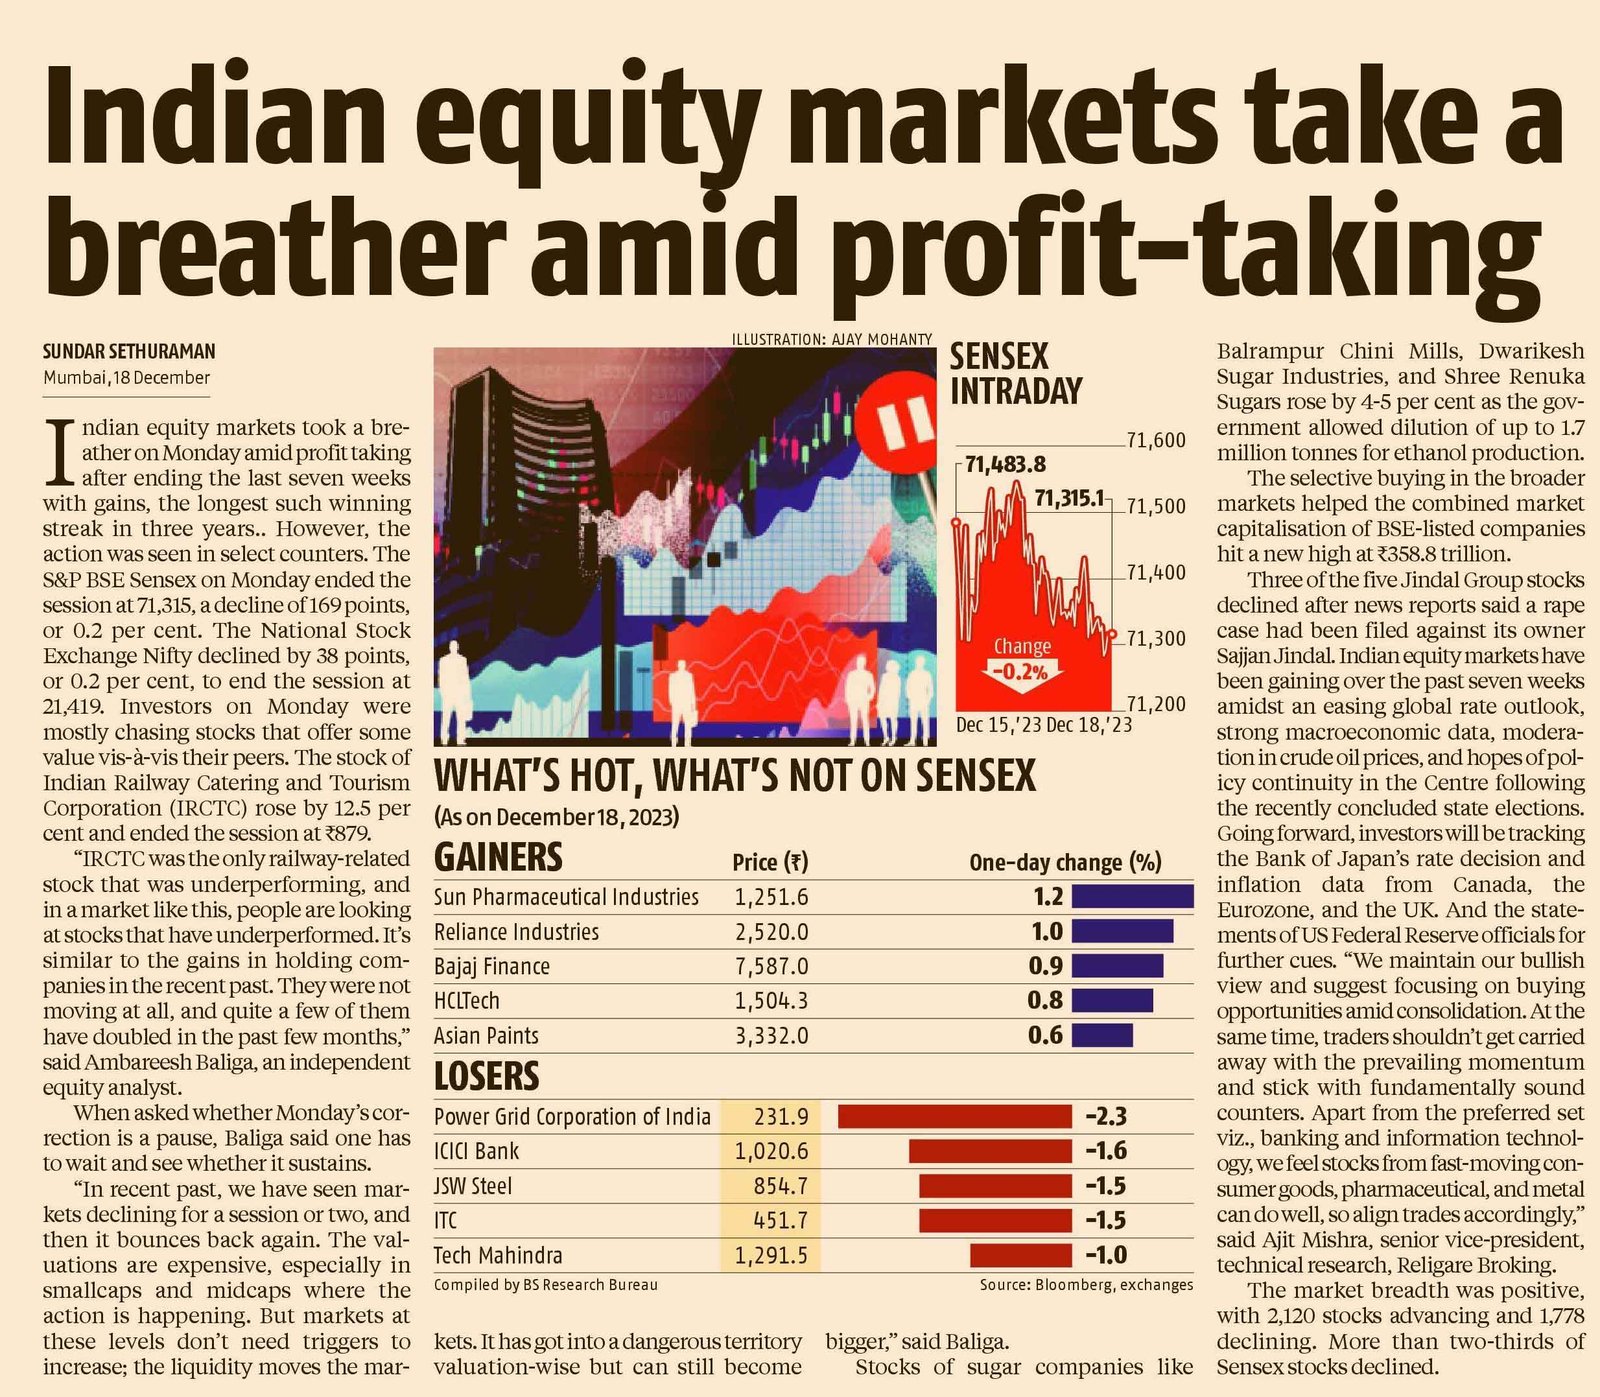 Indian equity markets take a breather amid profit-taking